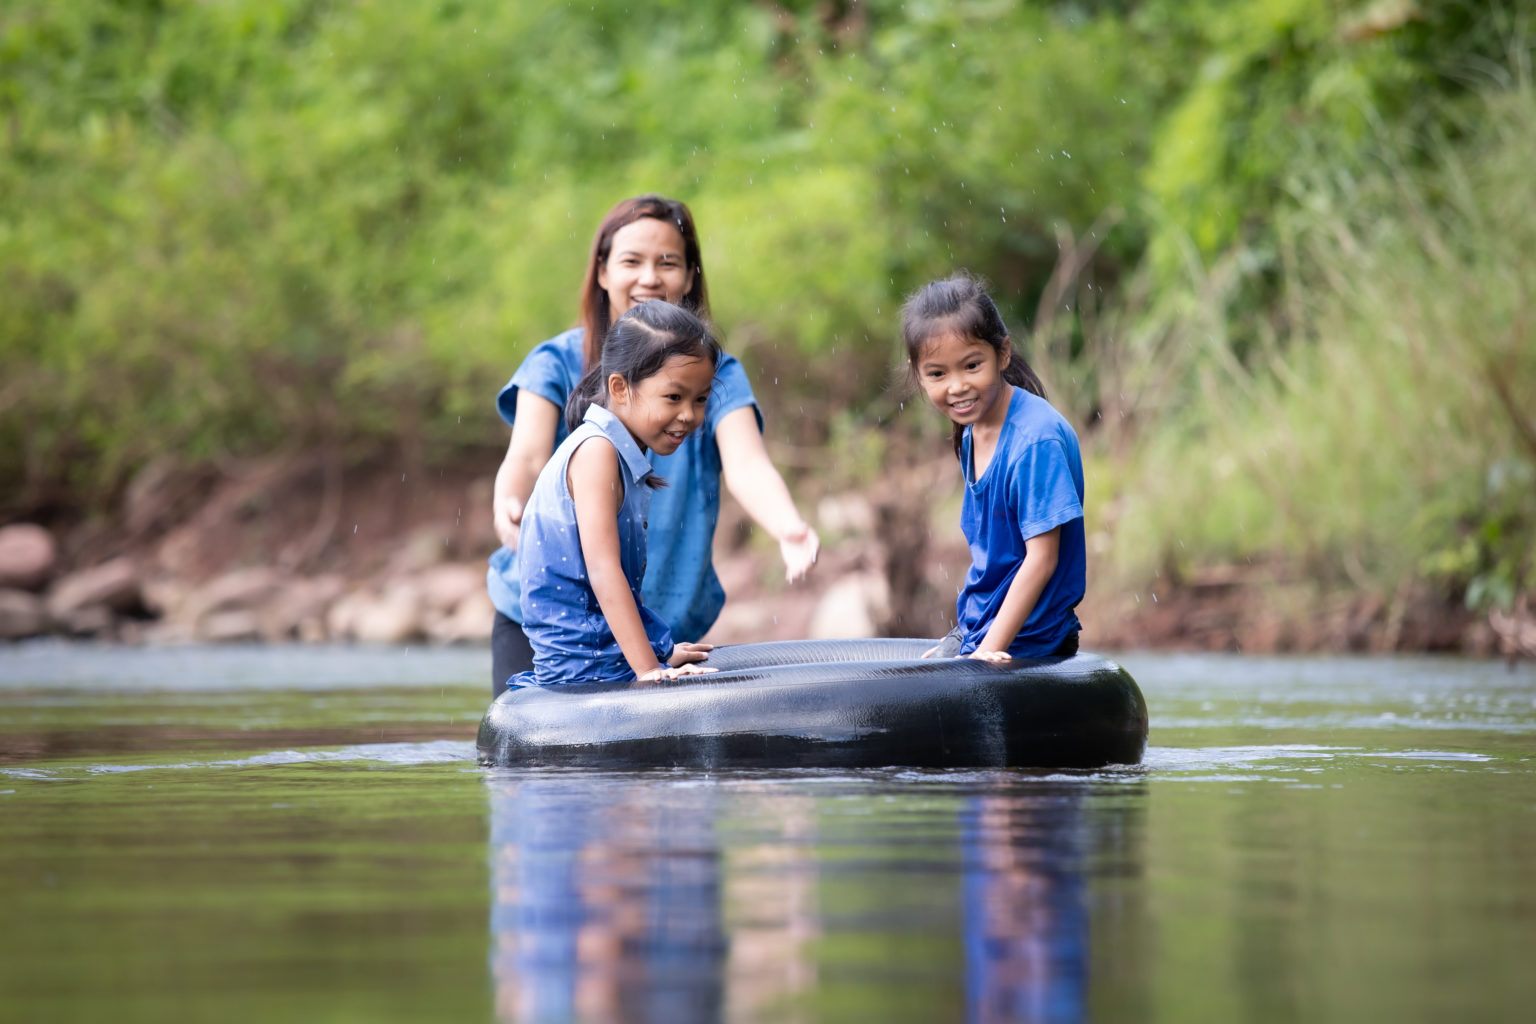 A woman pushes two children on an innertube down a stream.